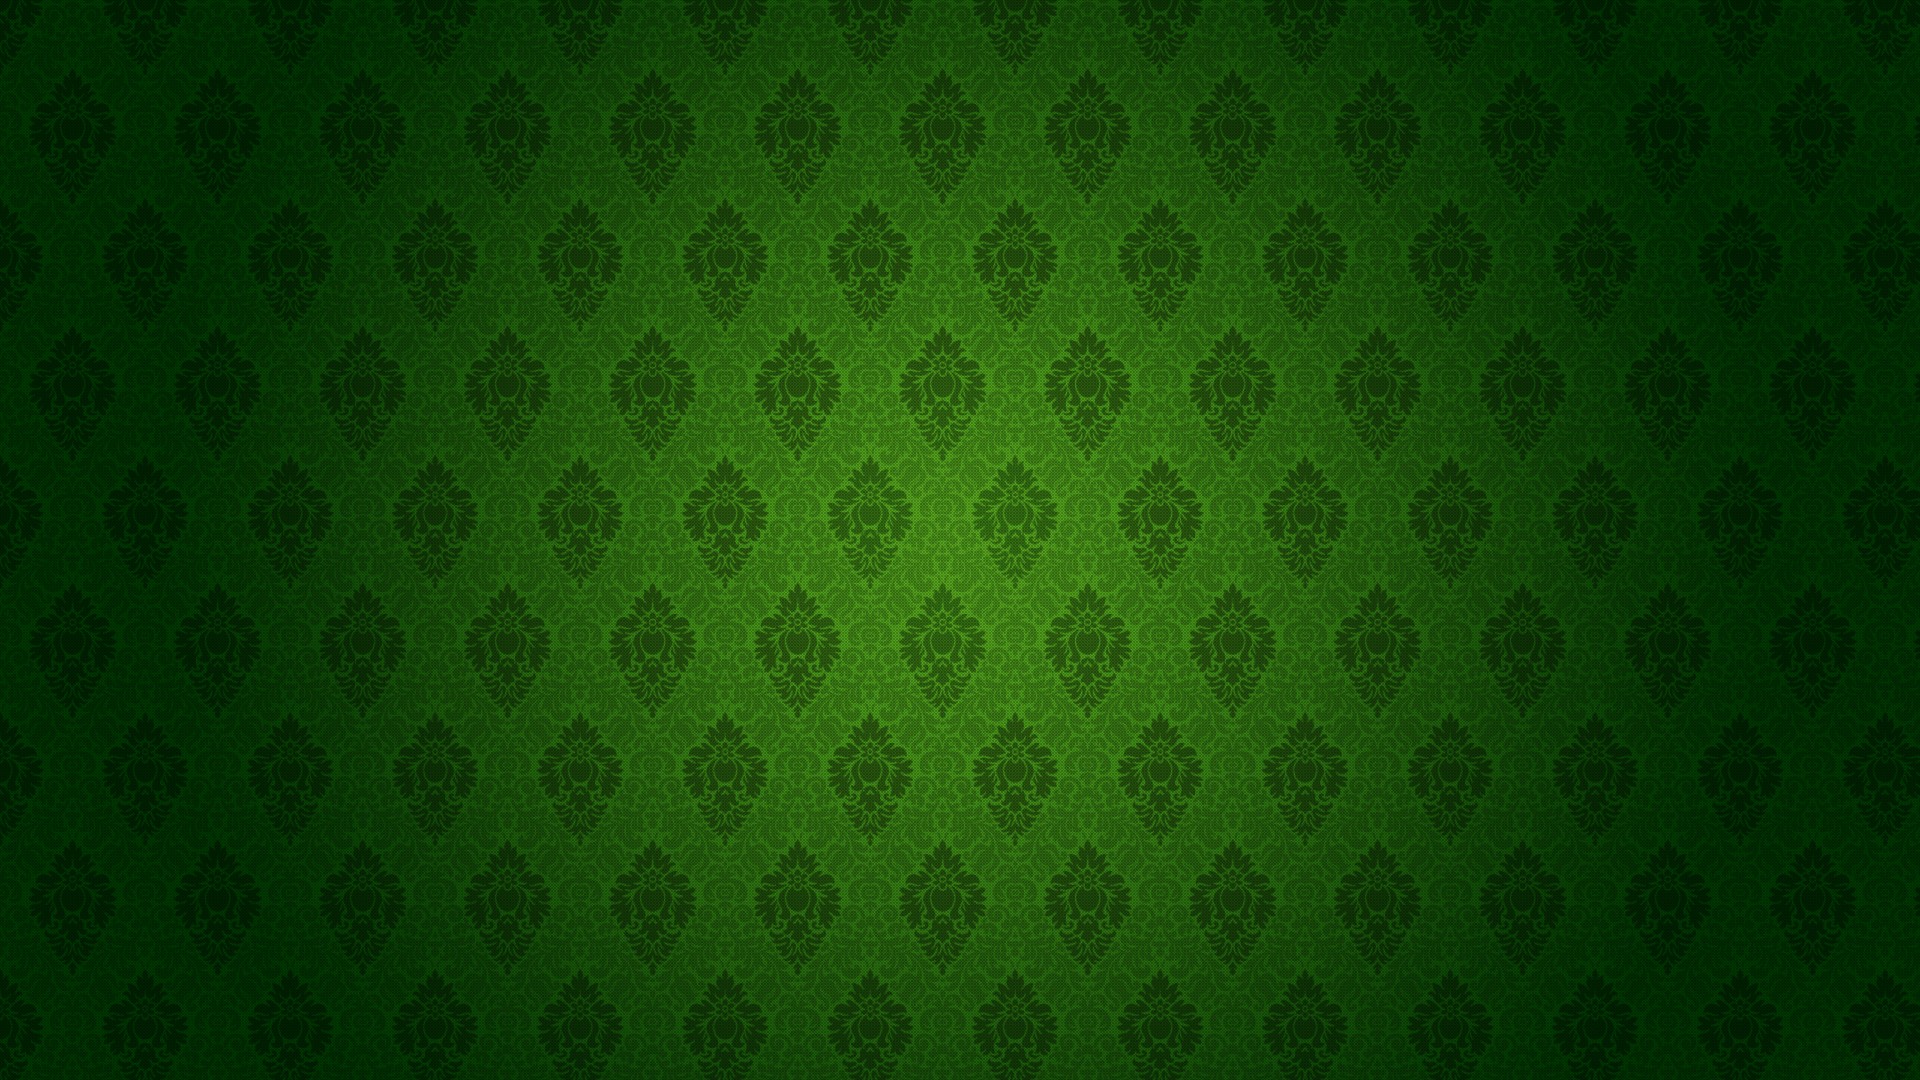 45 HD  Green  Wallpapers  Backgrounds  For Free  Download 